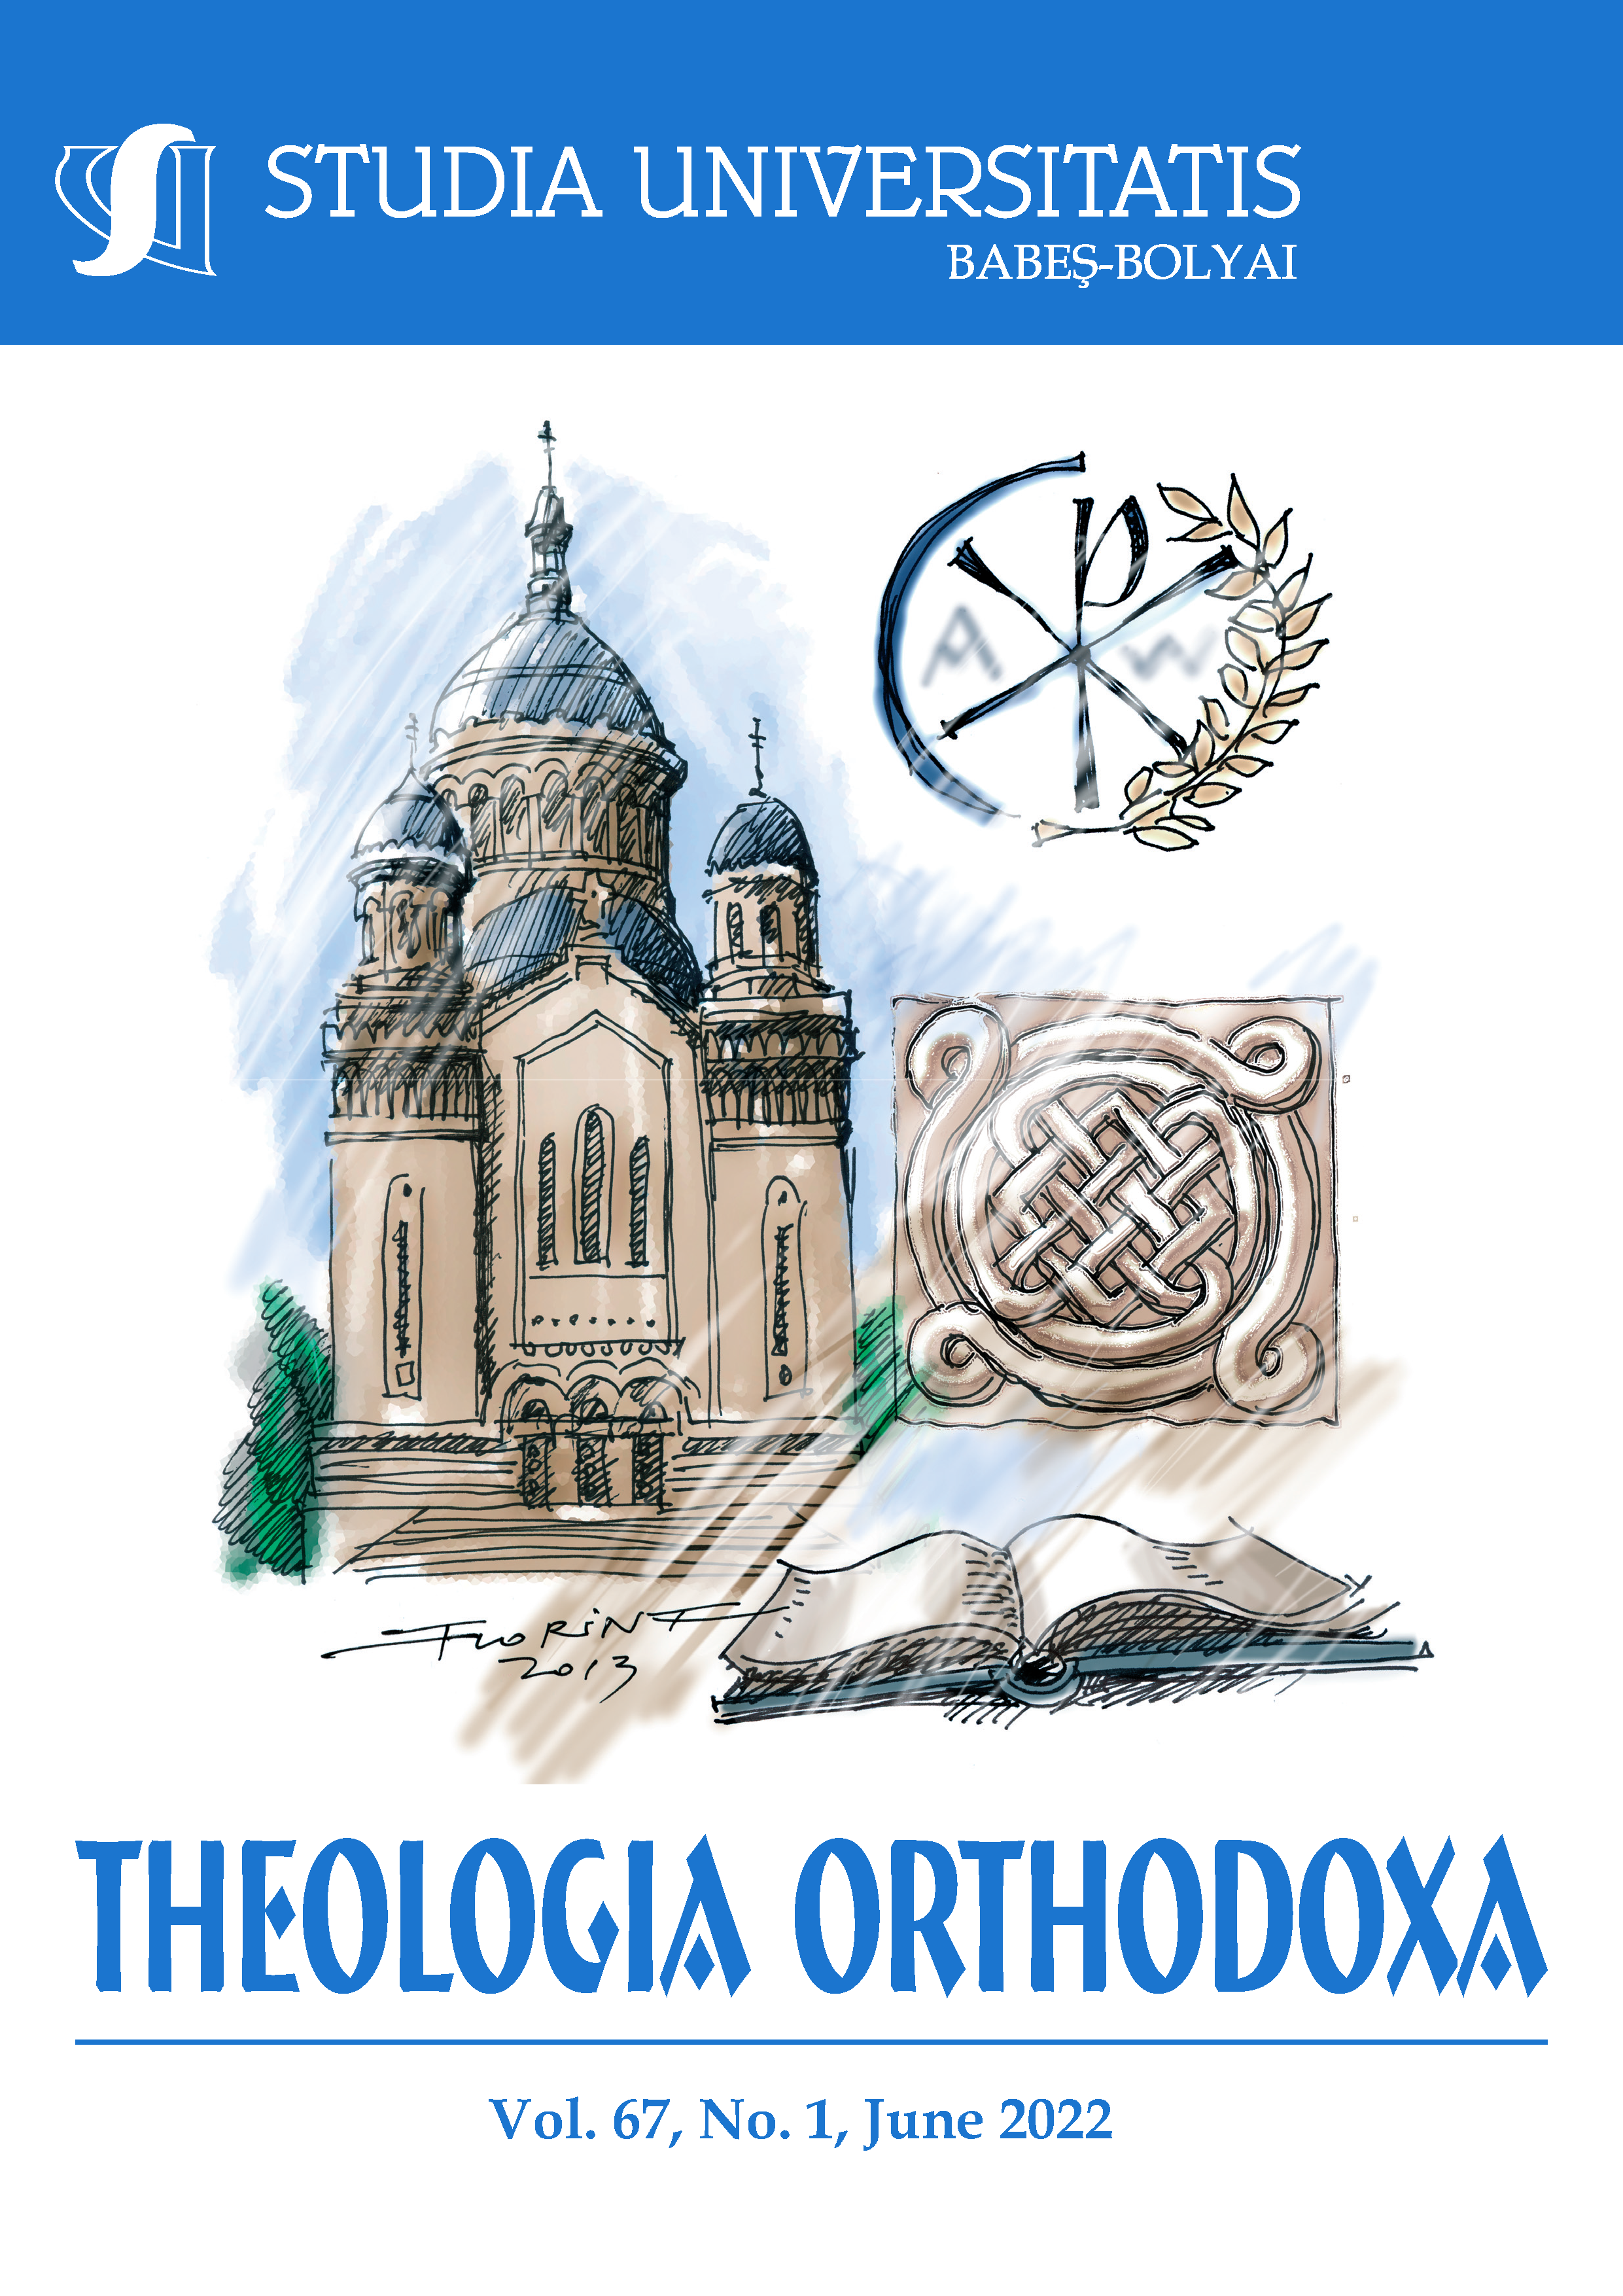 THE POLITICAL ROLE OF THE ORTHODOX CLERGY IN THE UNION OF THE ROMANIAN PRINCIPALITIES (1859)